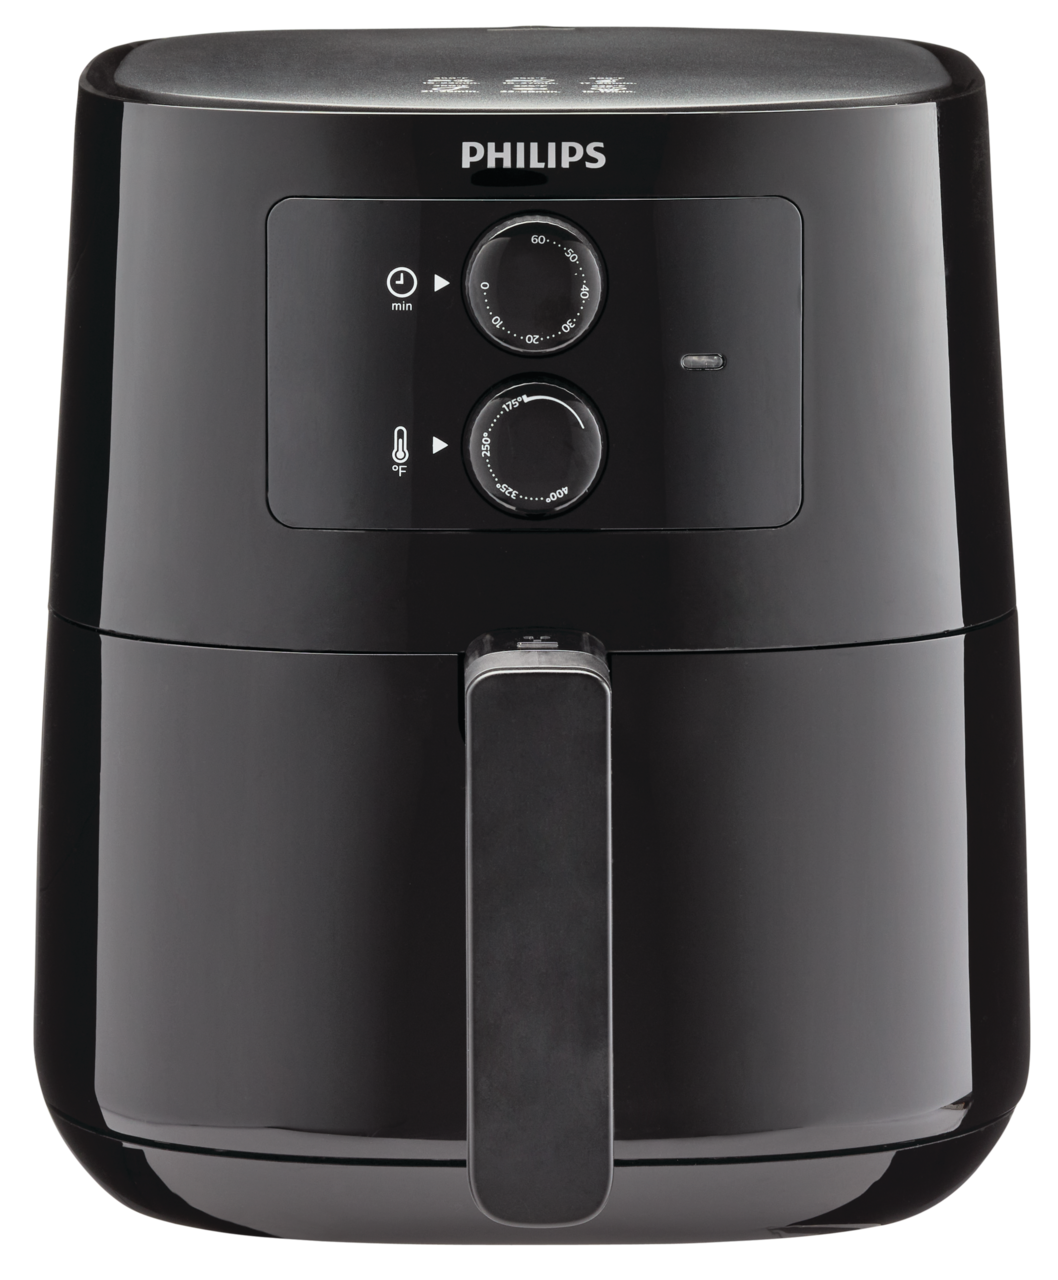 https://media-www.canadiantire.ca/product/living/kitchen/kitchen-appliances/0437068/philips-air-fryer-32ff96c9-bbb3-4999-9933-14b9e830b341.png?imdensity=1&imwidth=640&impolicy=mZoom